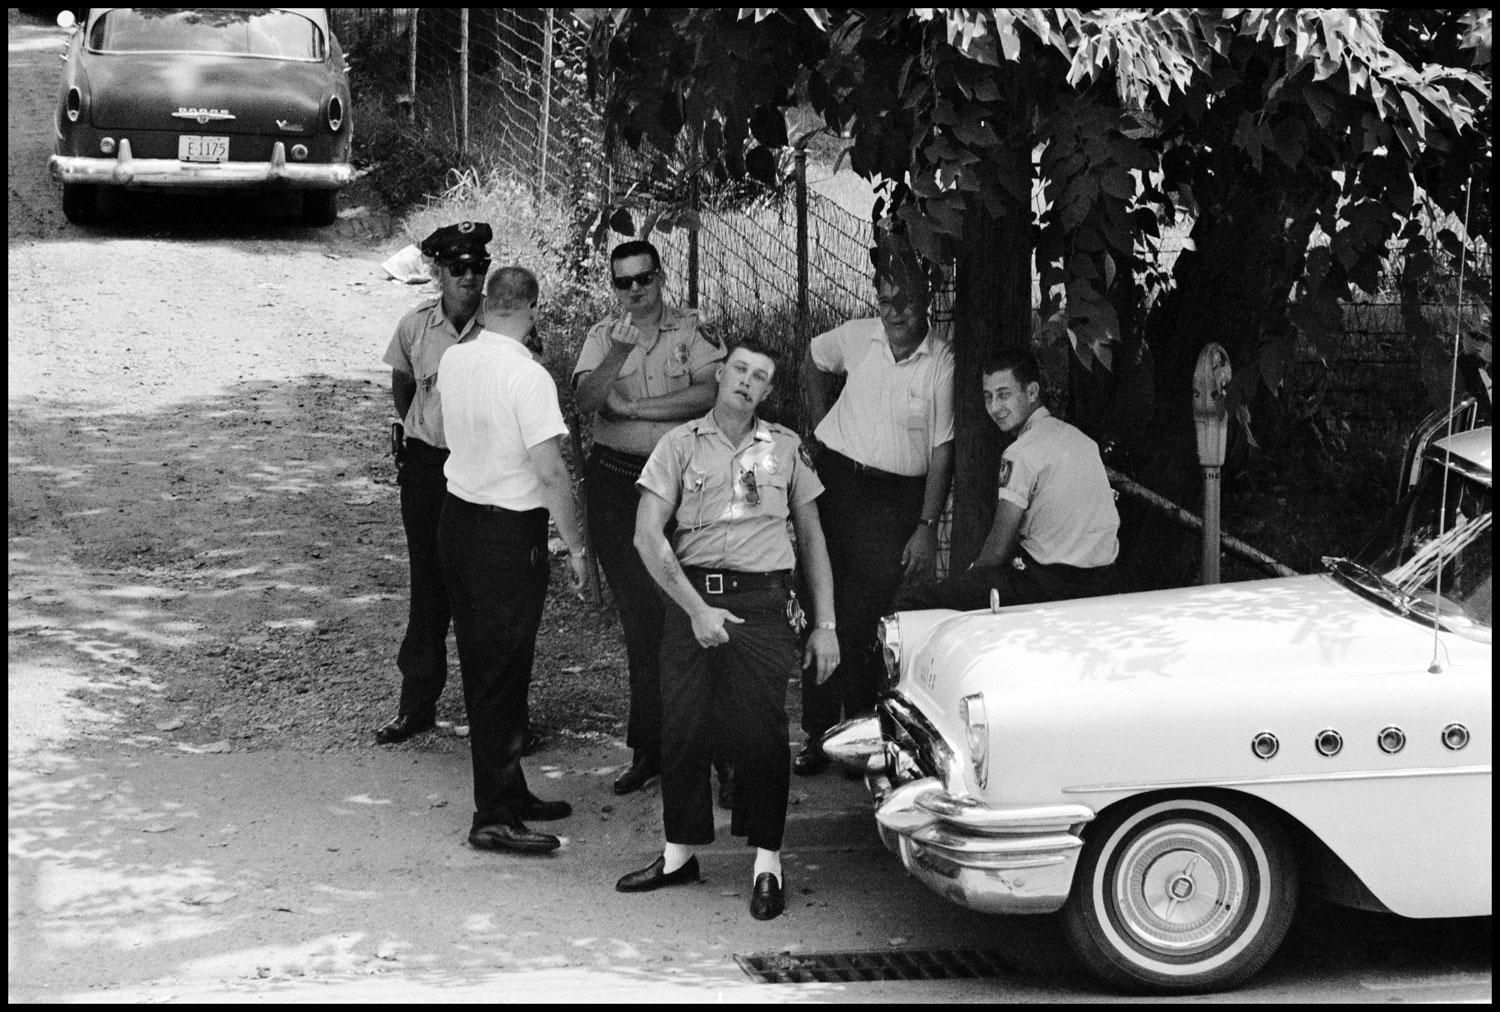 Police pose for a photograph as ministers from the National Council of Churches march to a local church, Clarksdale, Miss, 1963